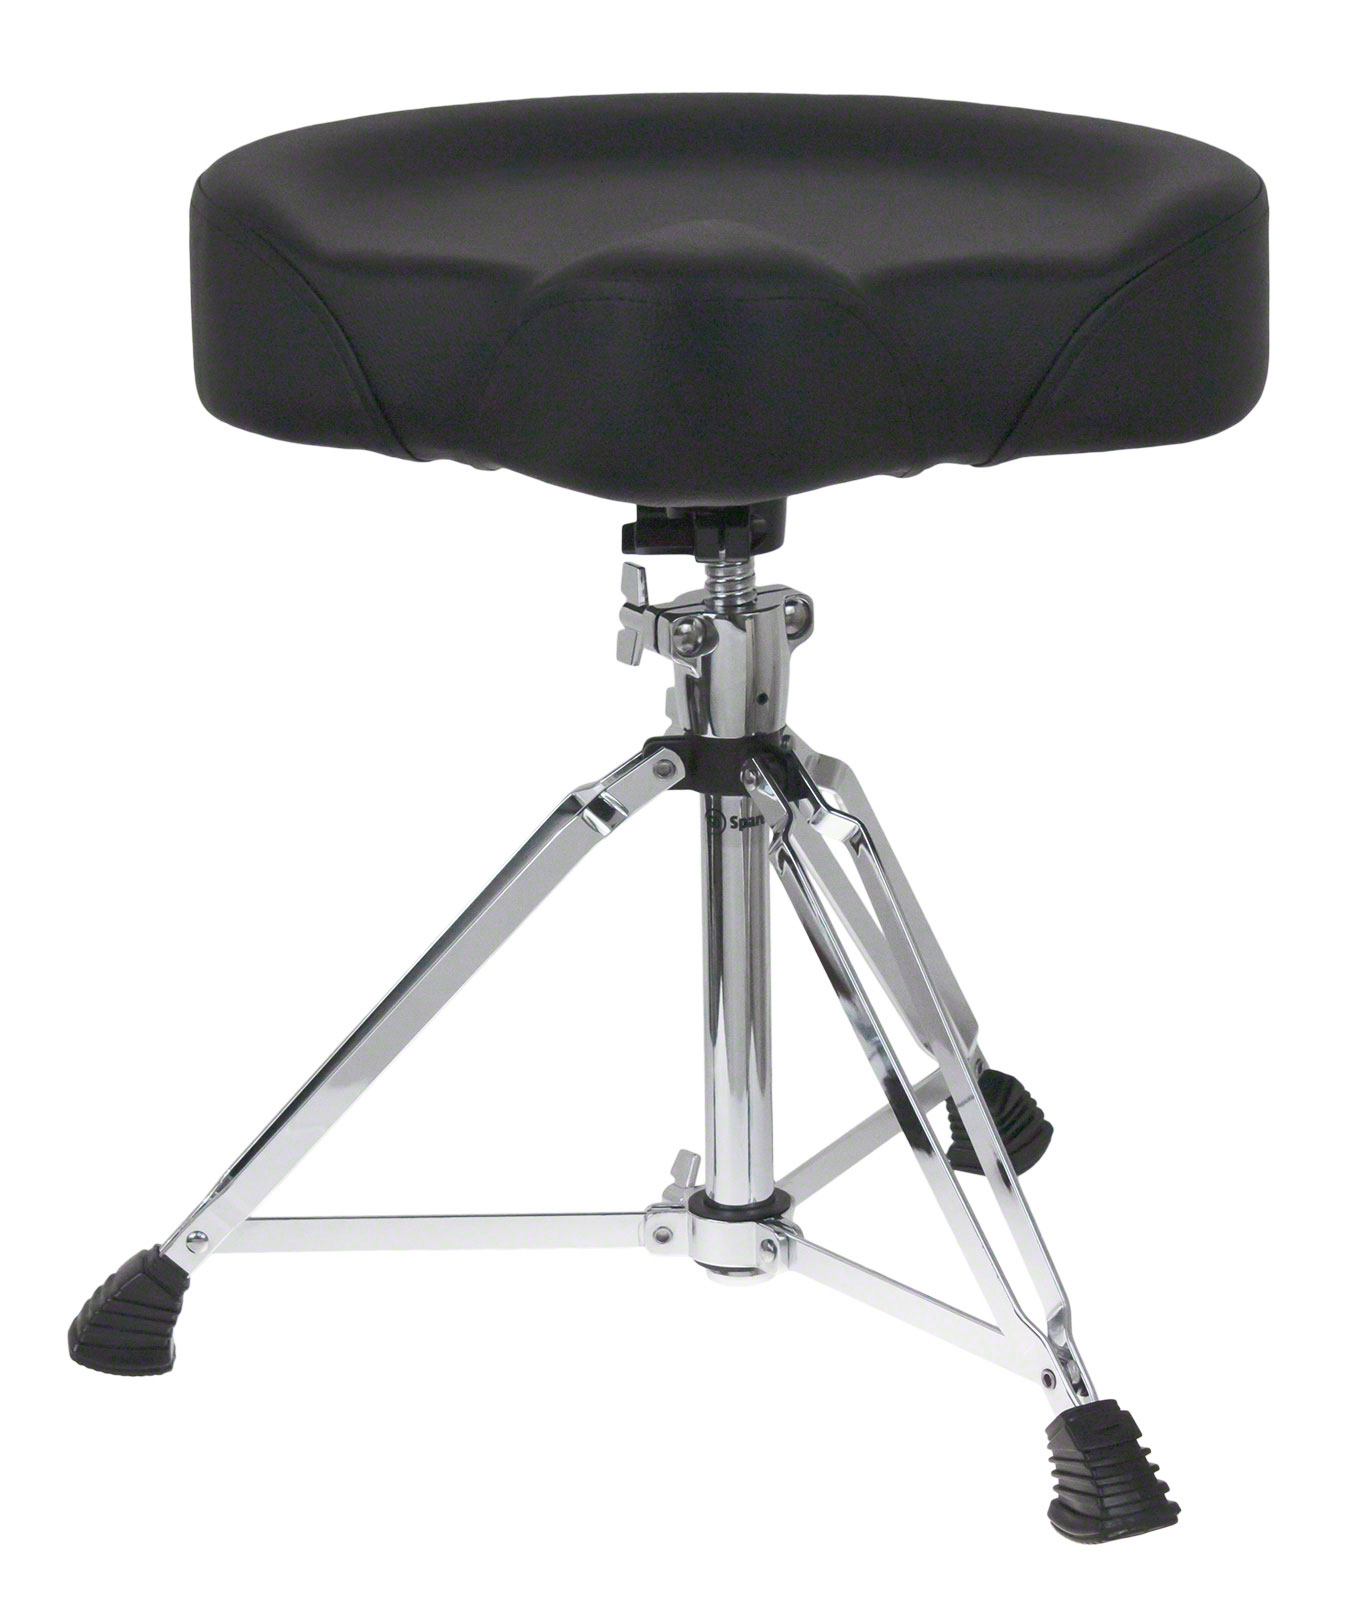 SPAREDRUM DTHS1 - PRO DRUM THRONE SADDLE SHAPED DOUBLE-BRACED LEGS